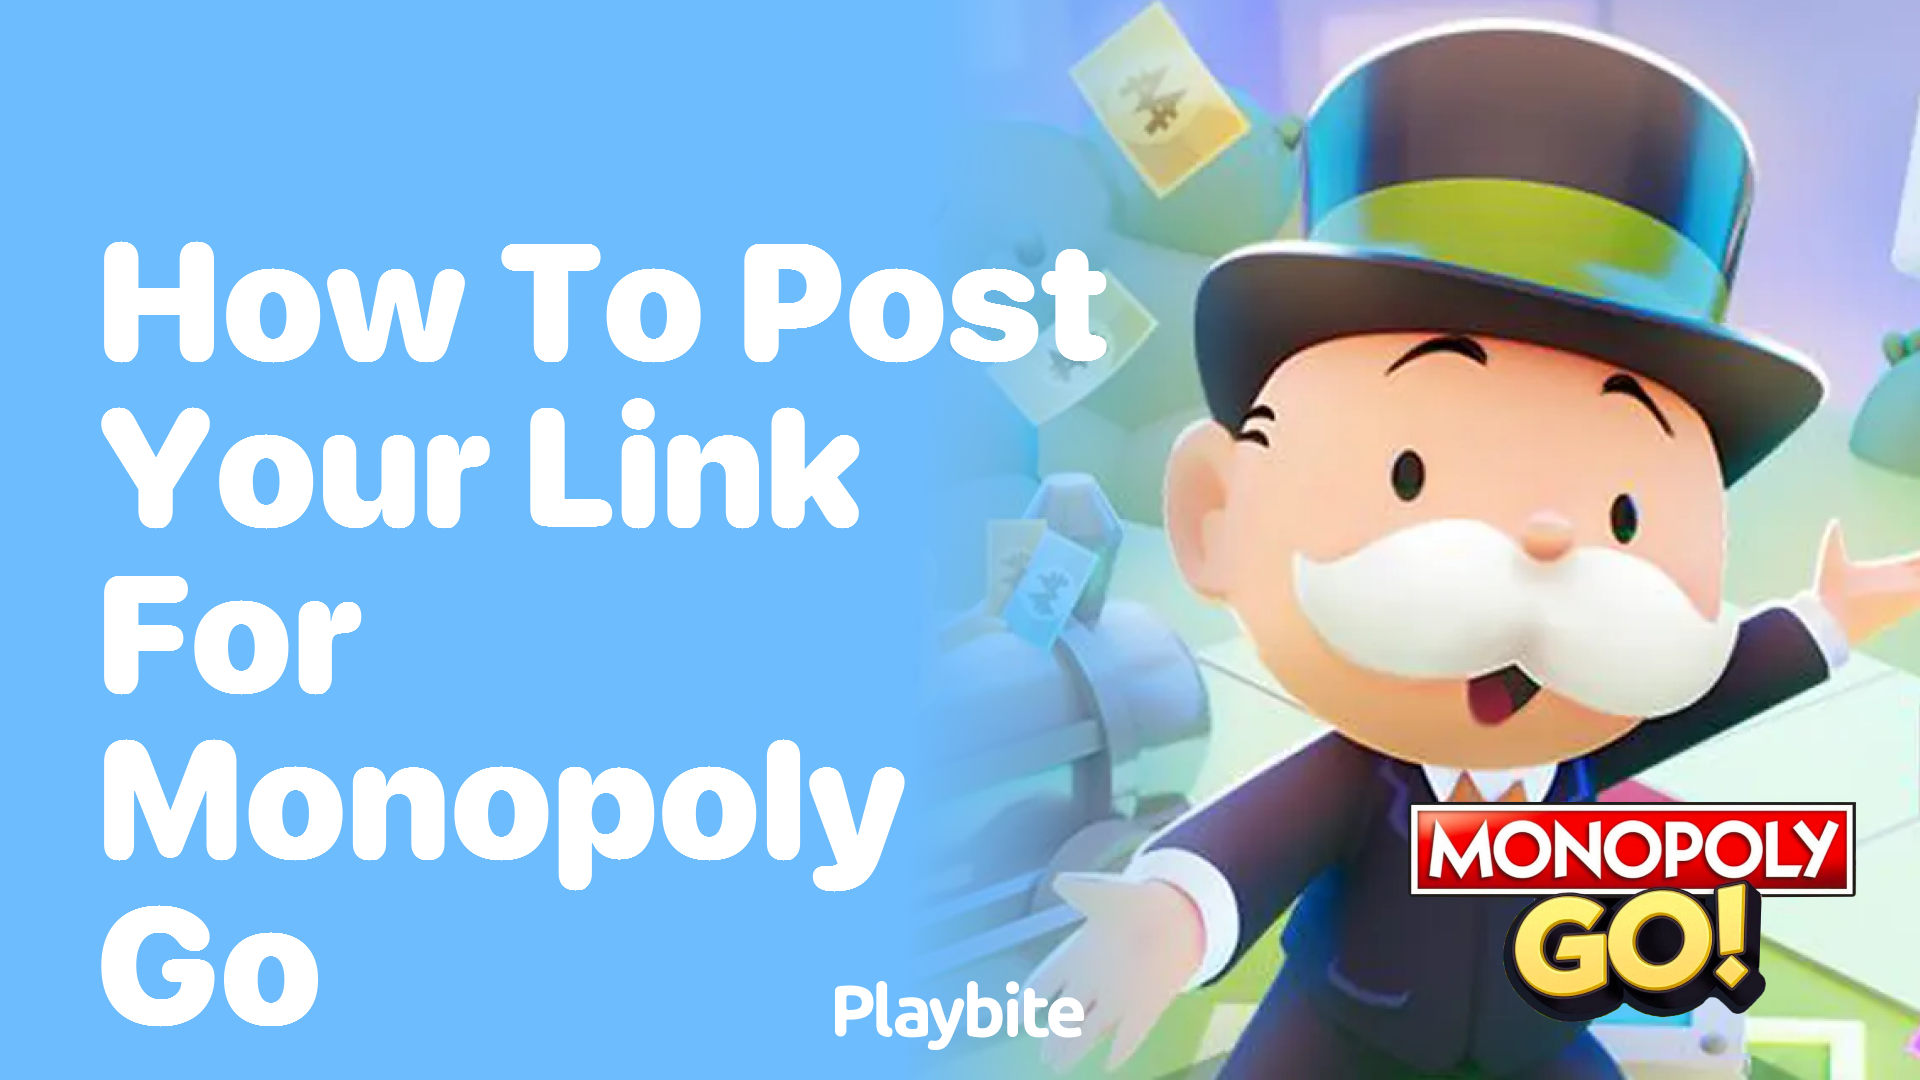 How to Post Your Link for Monopoly Go